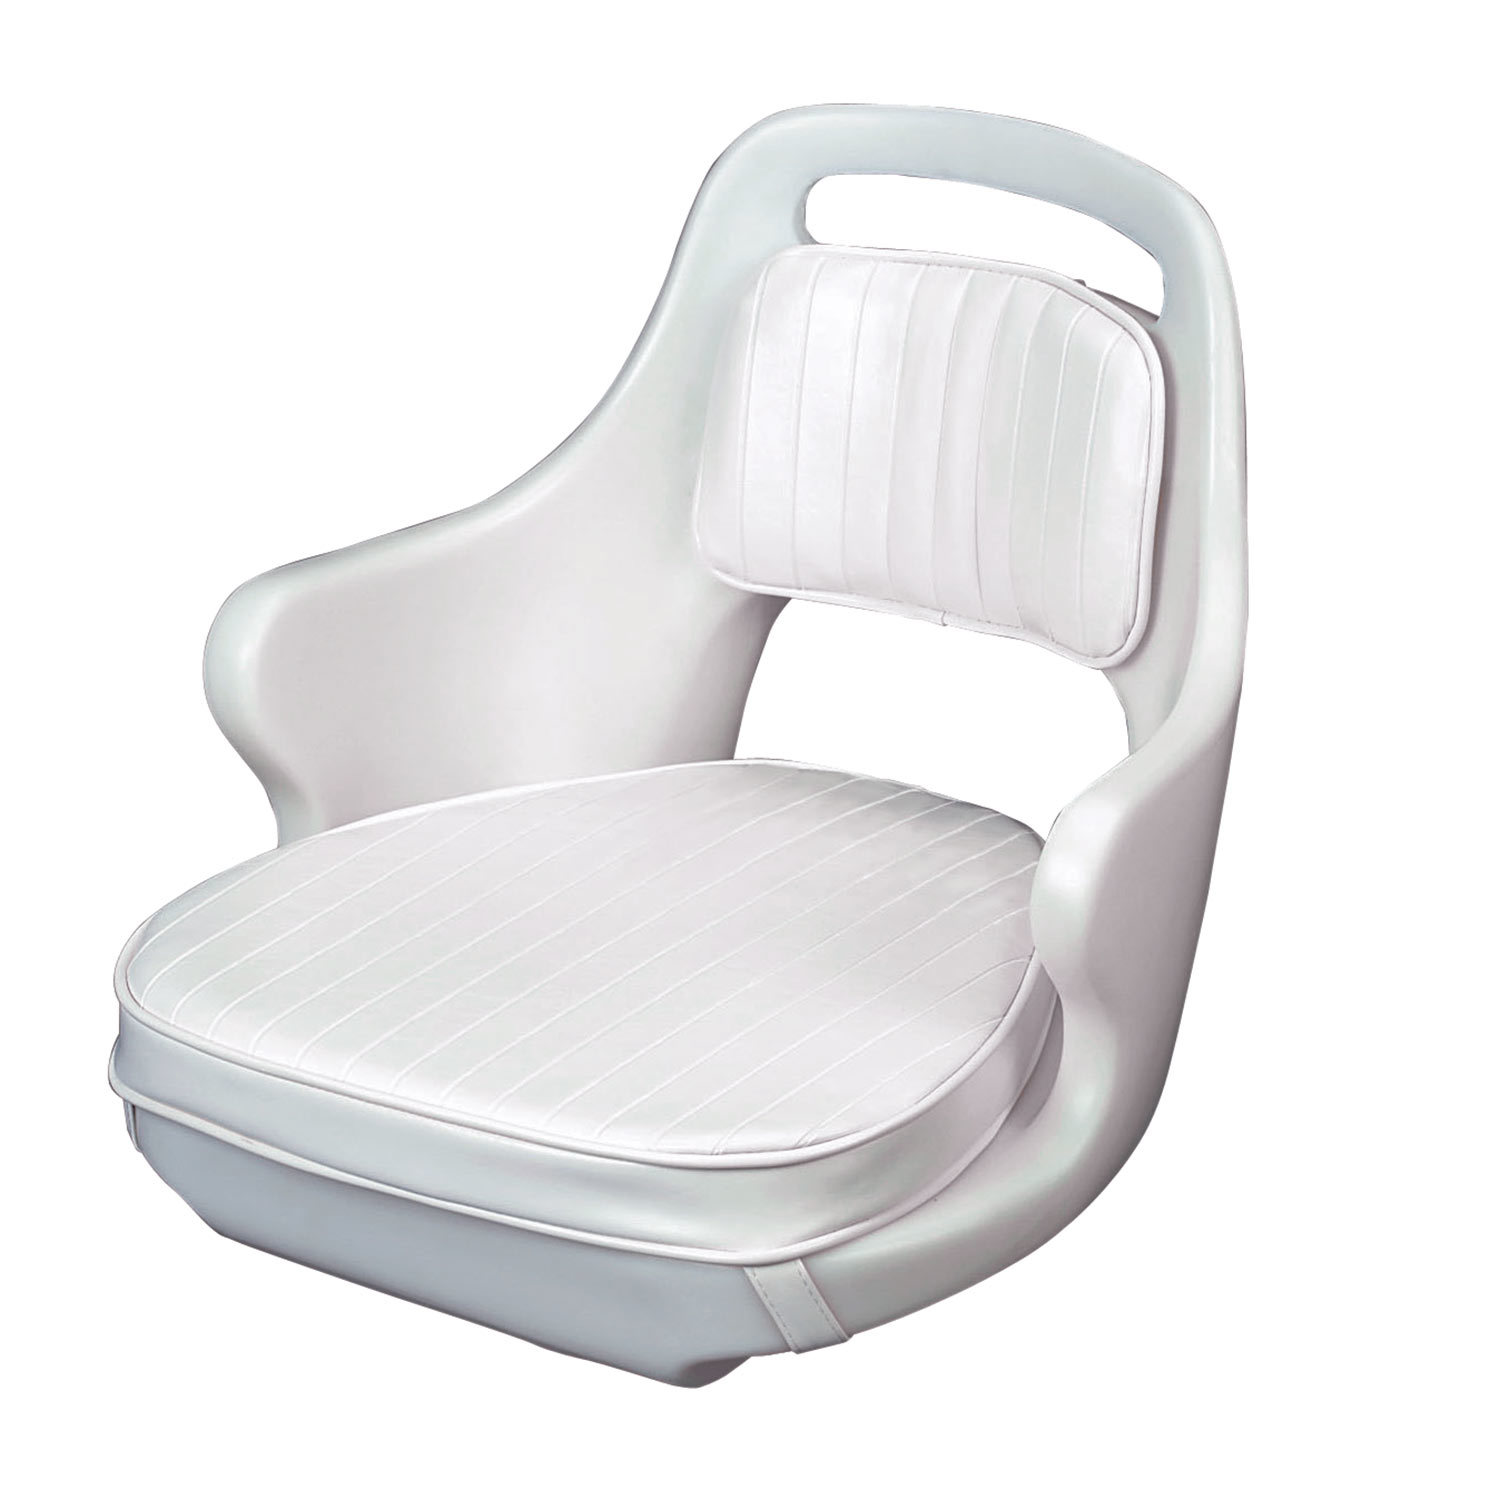 POLYWOOD® South Lifeguard Chair Seat Replacement Cushion